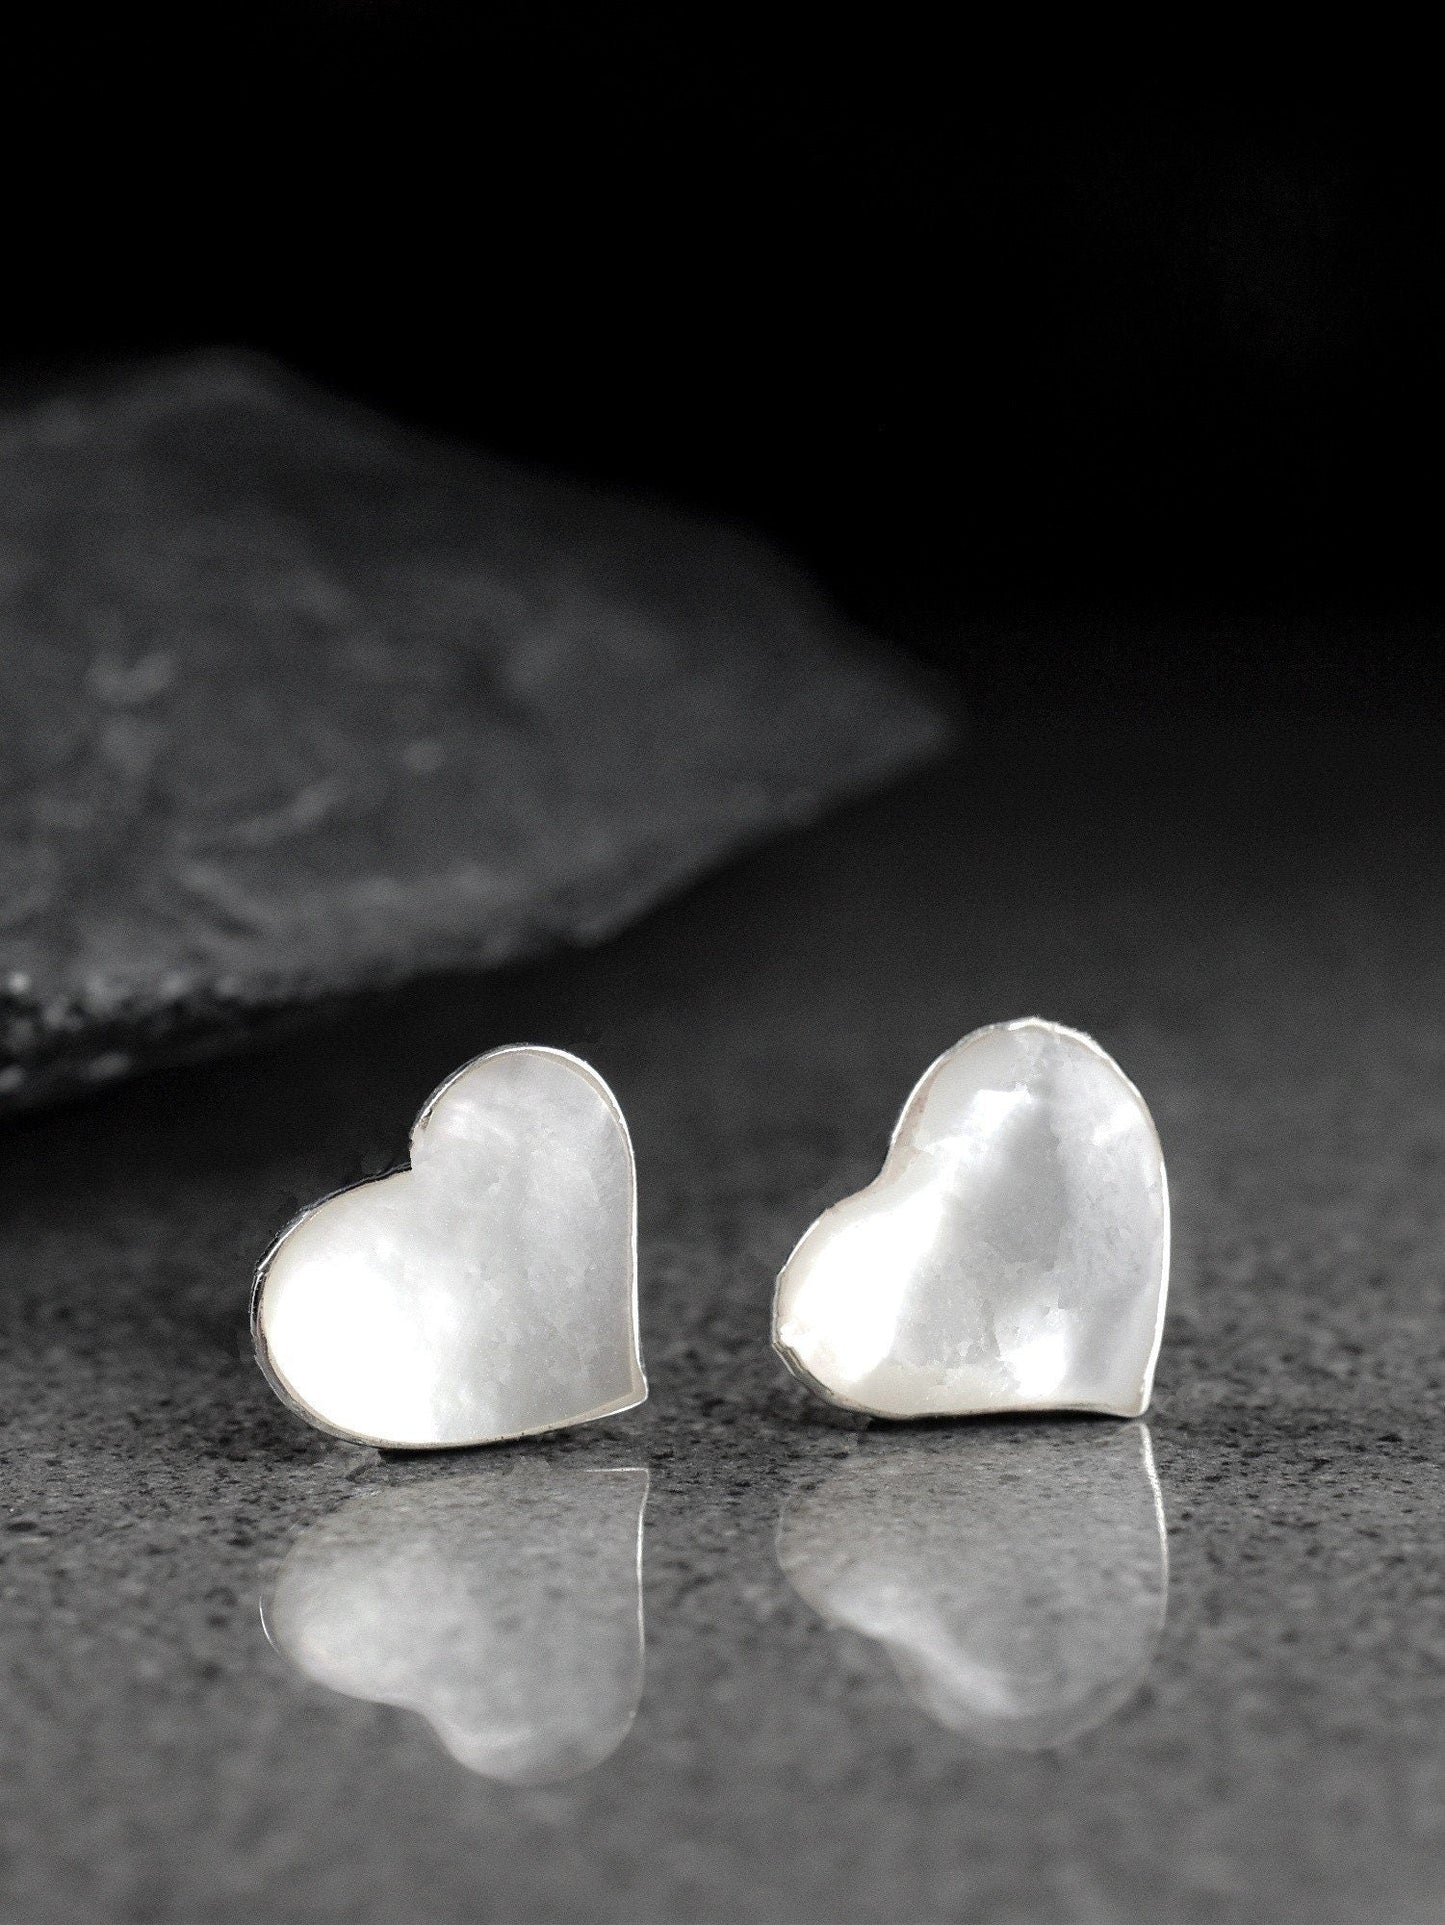 Heart-shaped mother of pearl earrings made of 925 sterling silver - Ear925-94